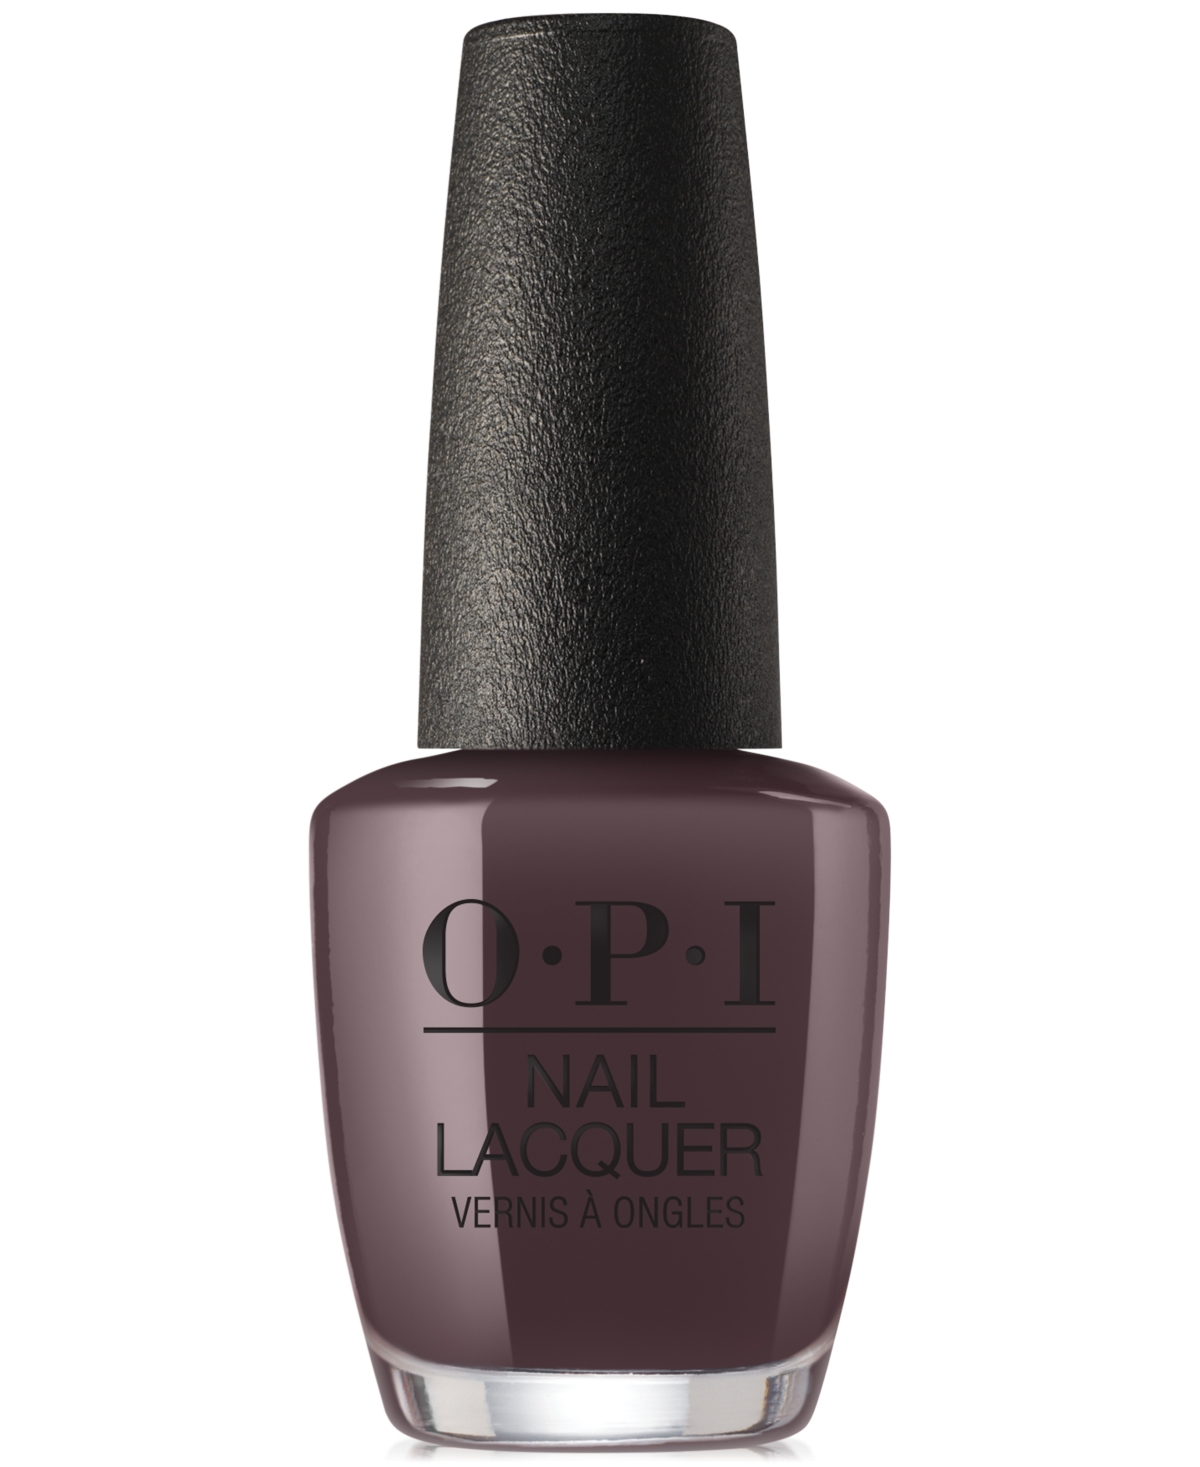 Opi Nail Lacquer In Krona-logical Order